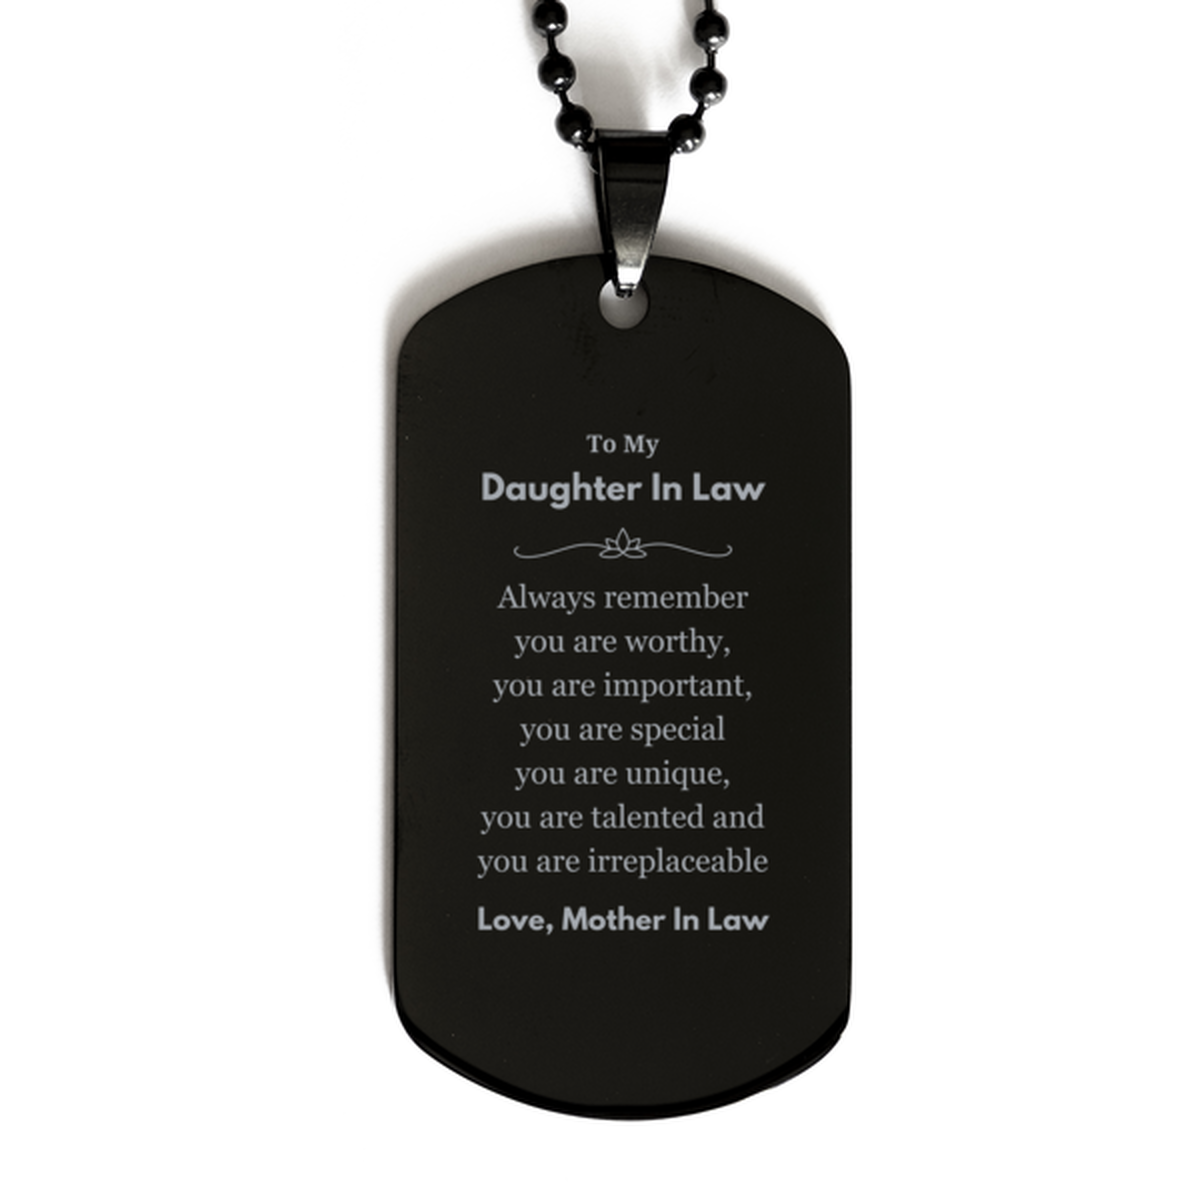 Daughter In Law Birthday Gifts from Mother In Law, Inspirational Black Dog Tag for Daughter In Law Christmas Graduation Gifts for Daughter In Law Always remember you are worthy, you are important. Love, Mother In Law